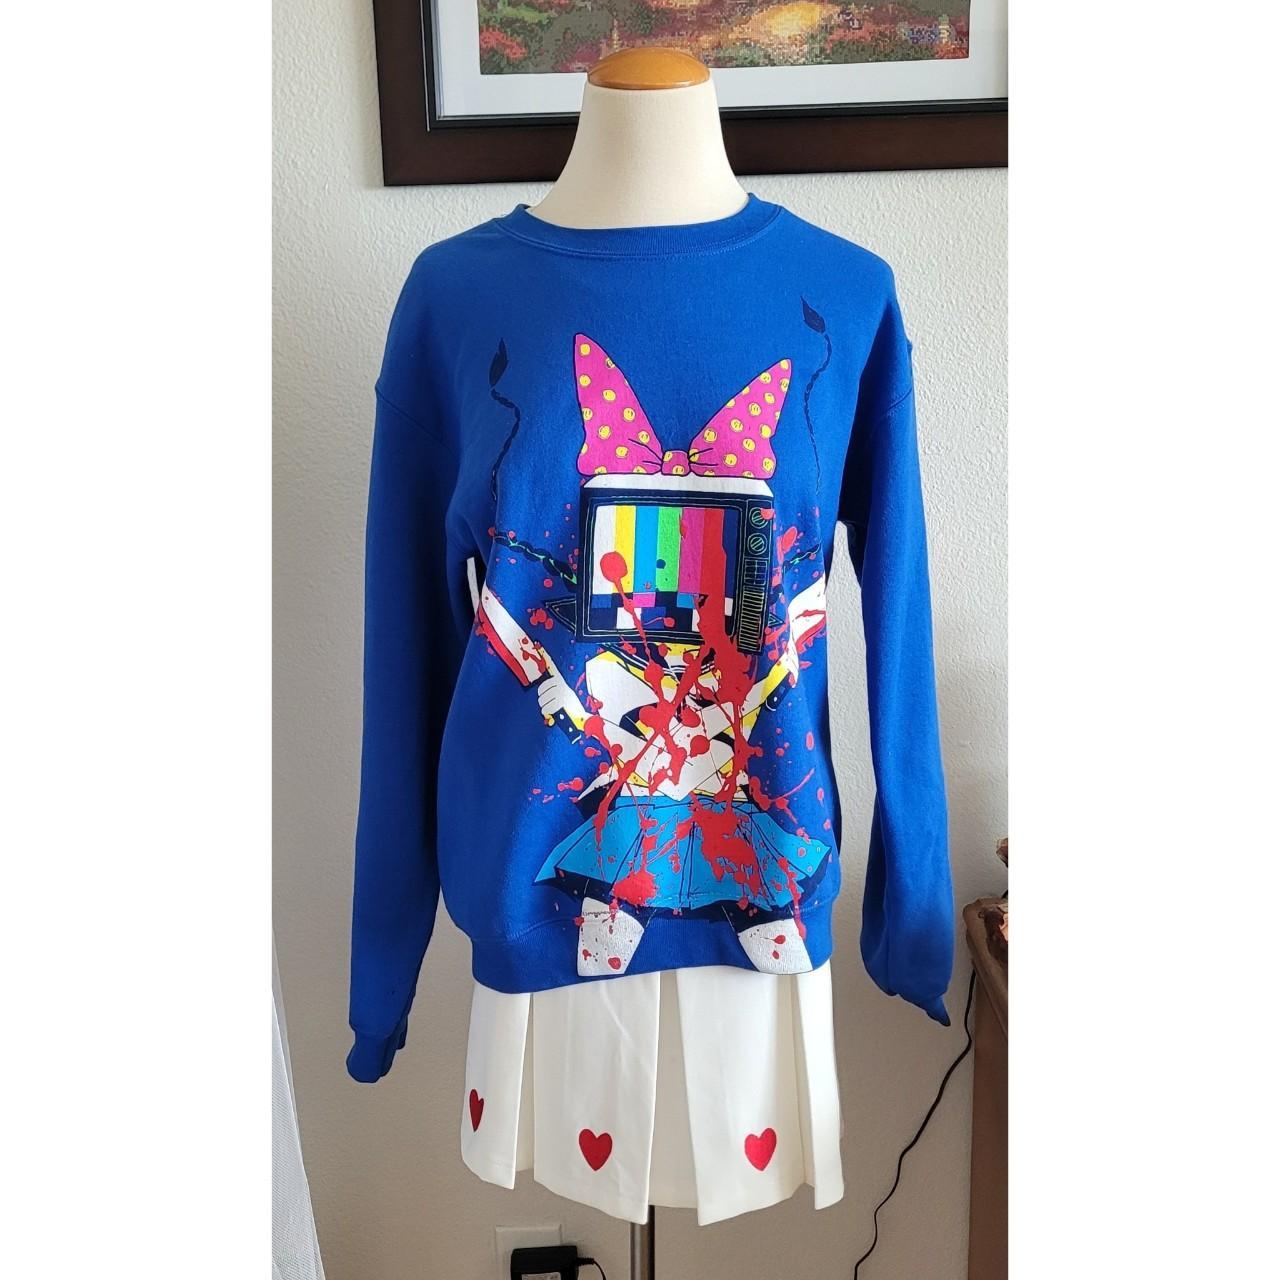 Product Image 1 - Vintage OMOCAT sweater!

This style is